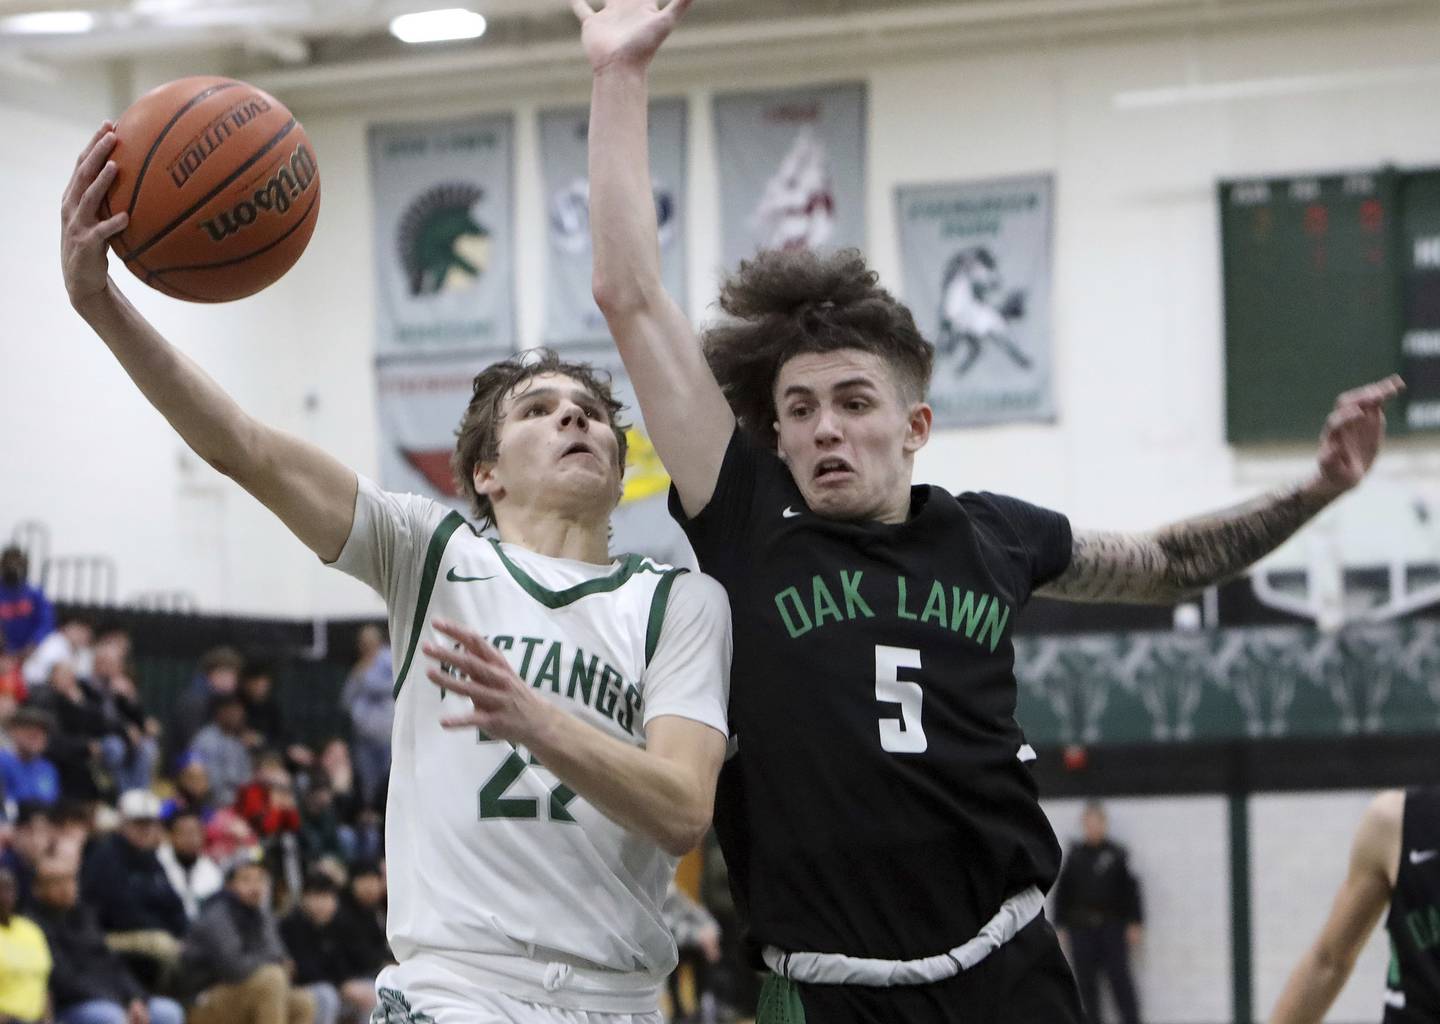 Evergreen Park's Nolan Sexton (22) drives to the basket as Oak Lawn's Robert Wagner (5) defends during a South Suburban Red game in Evergreen Park on Thursday, Dec. 8, 2022.